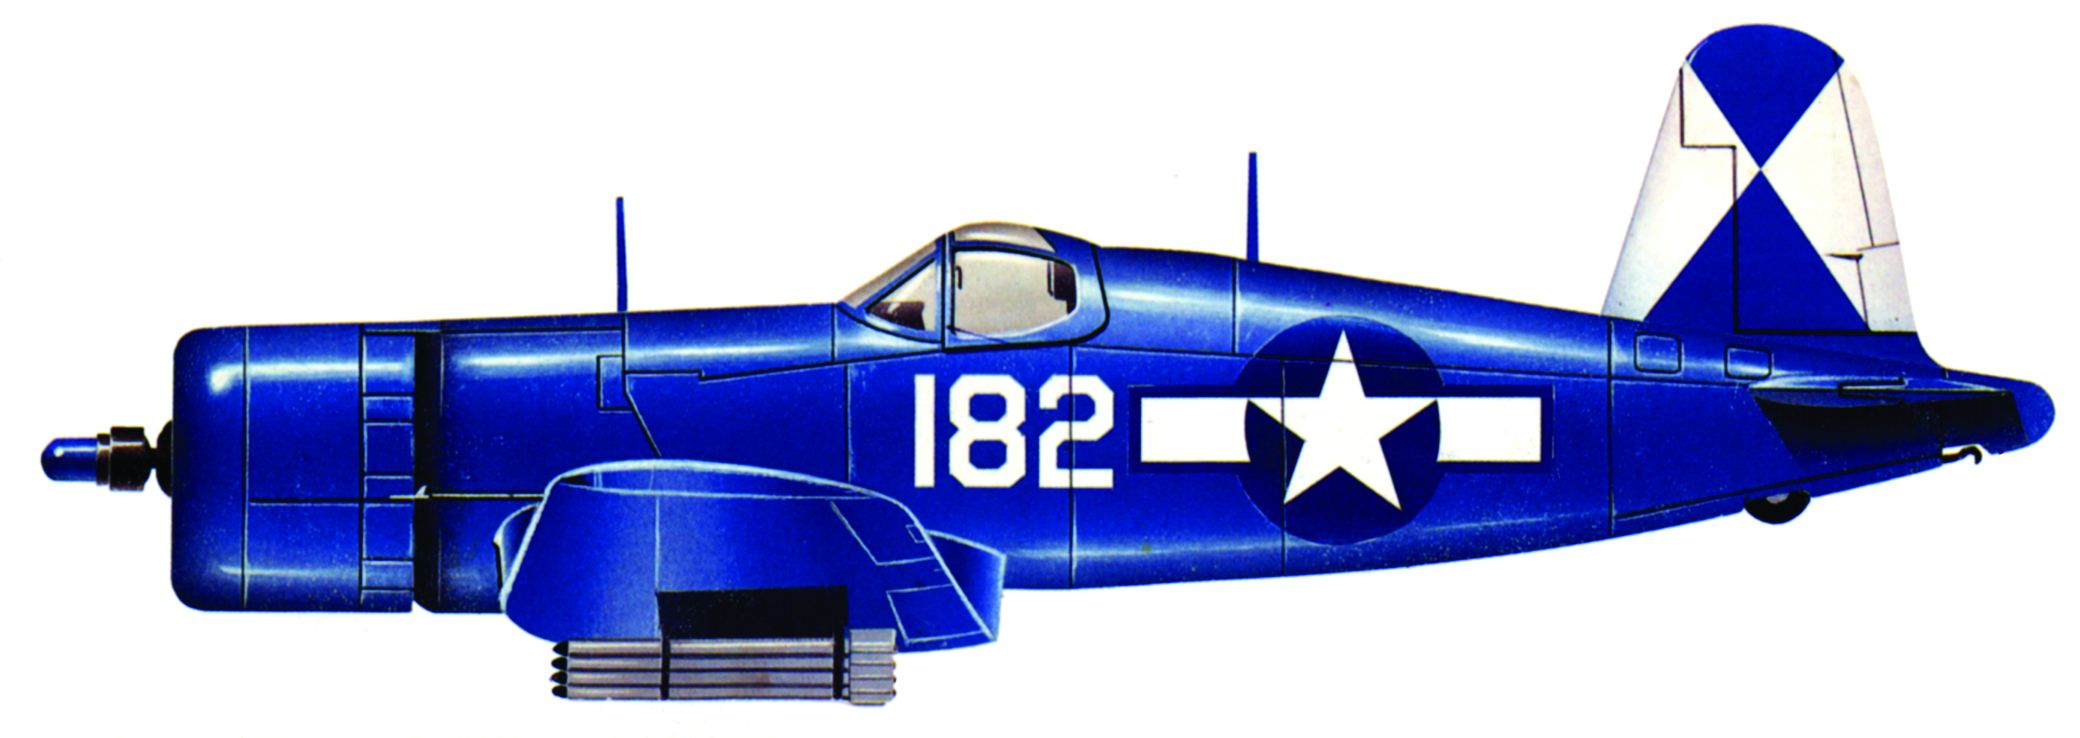 The Vought F4U-1D fighter, a later version of the type flown by Bud Dworzak, saw an extensive service career, which included combat operations during the Korean War.